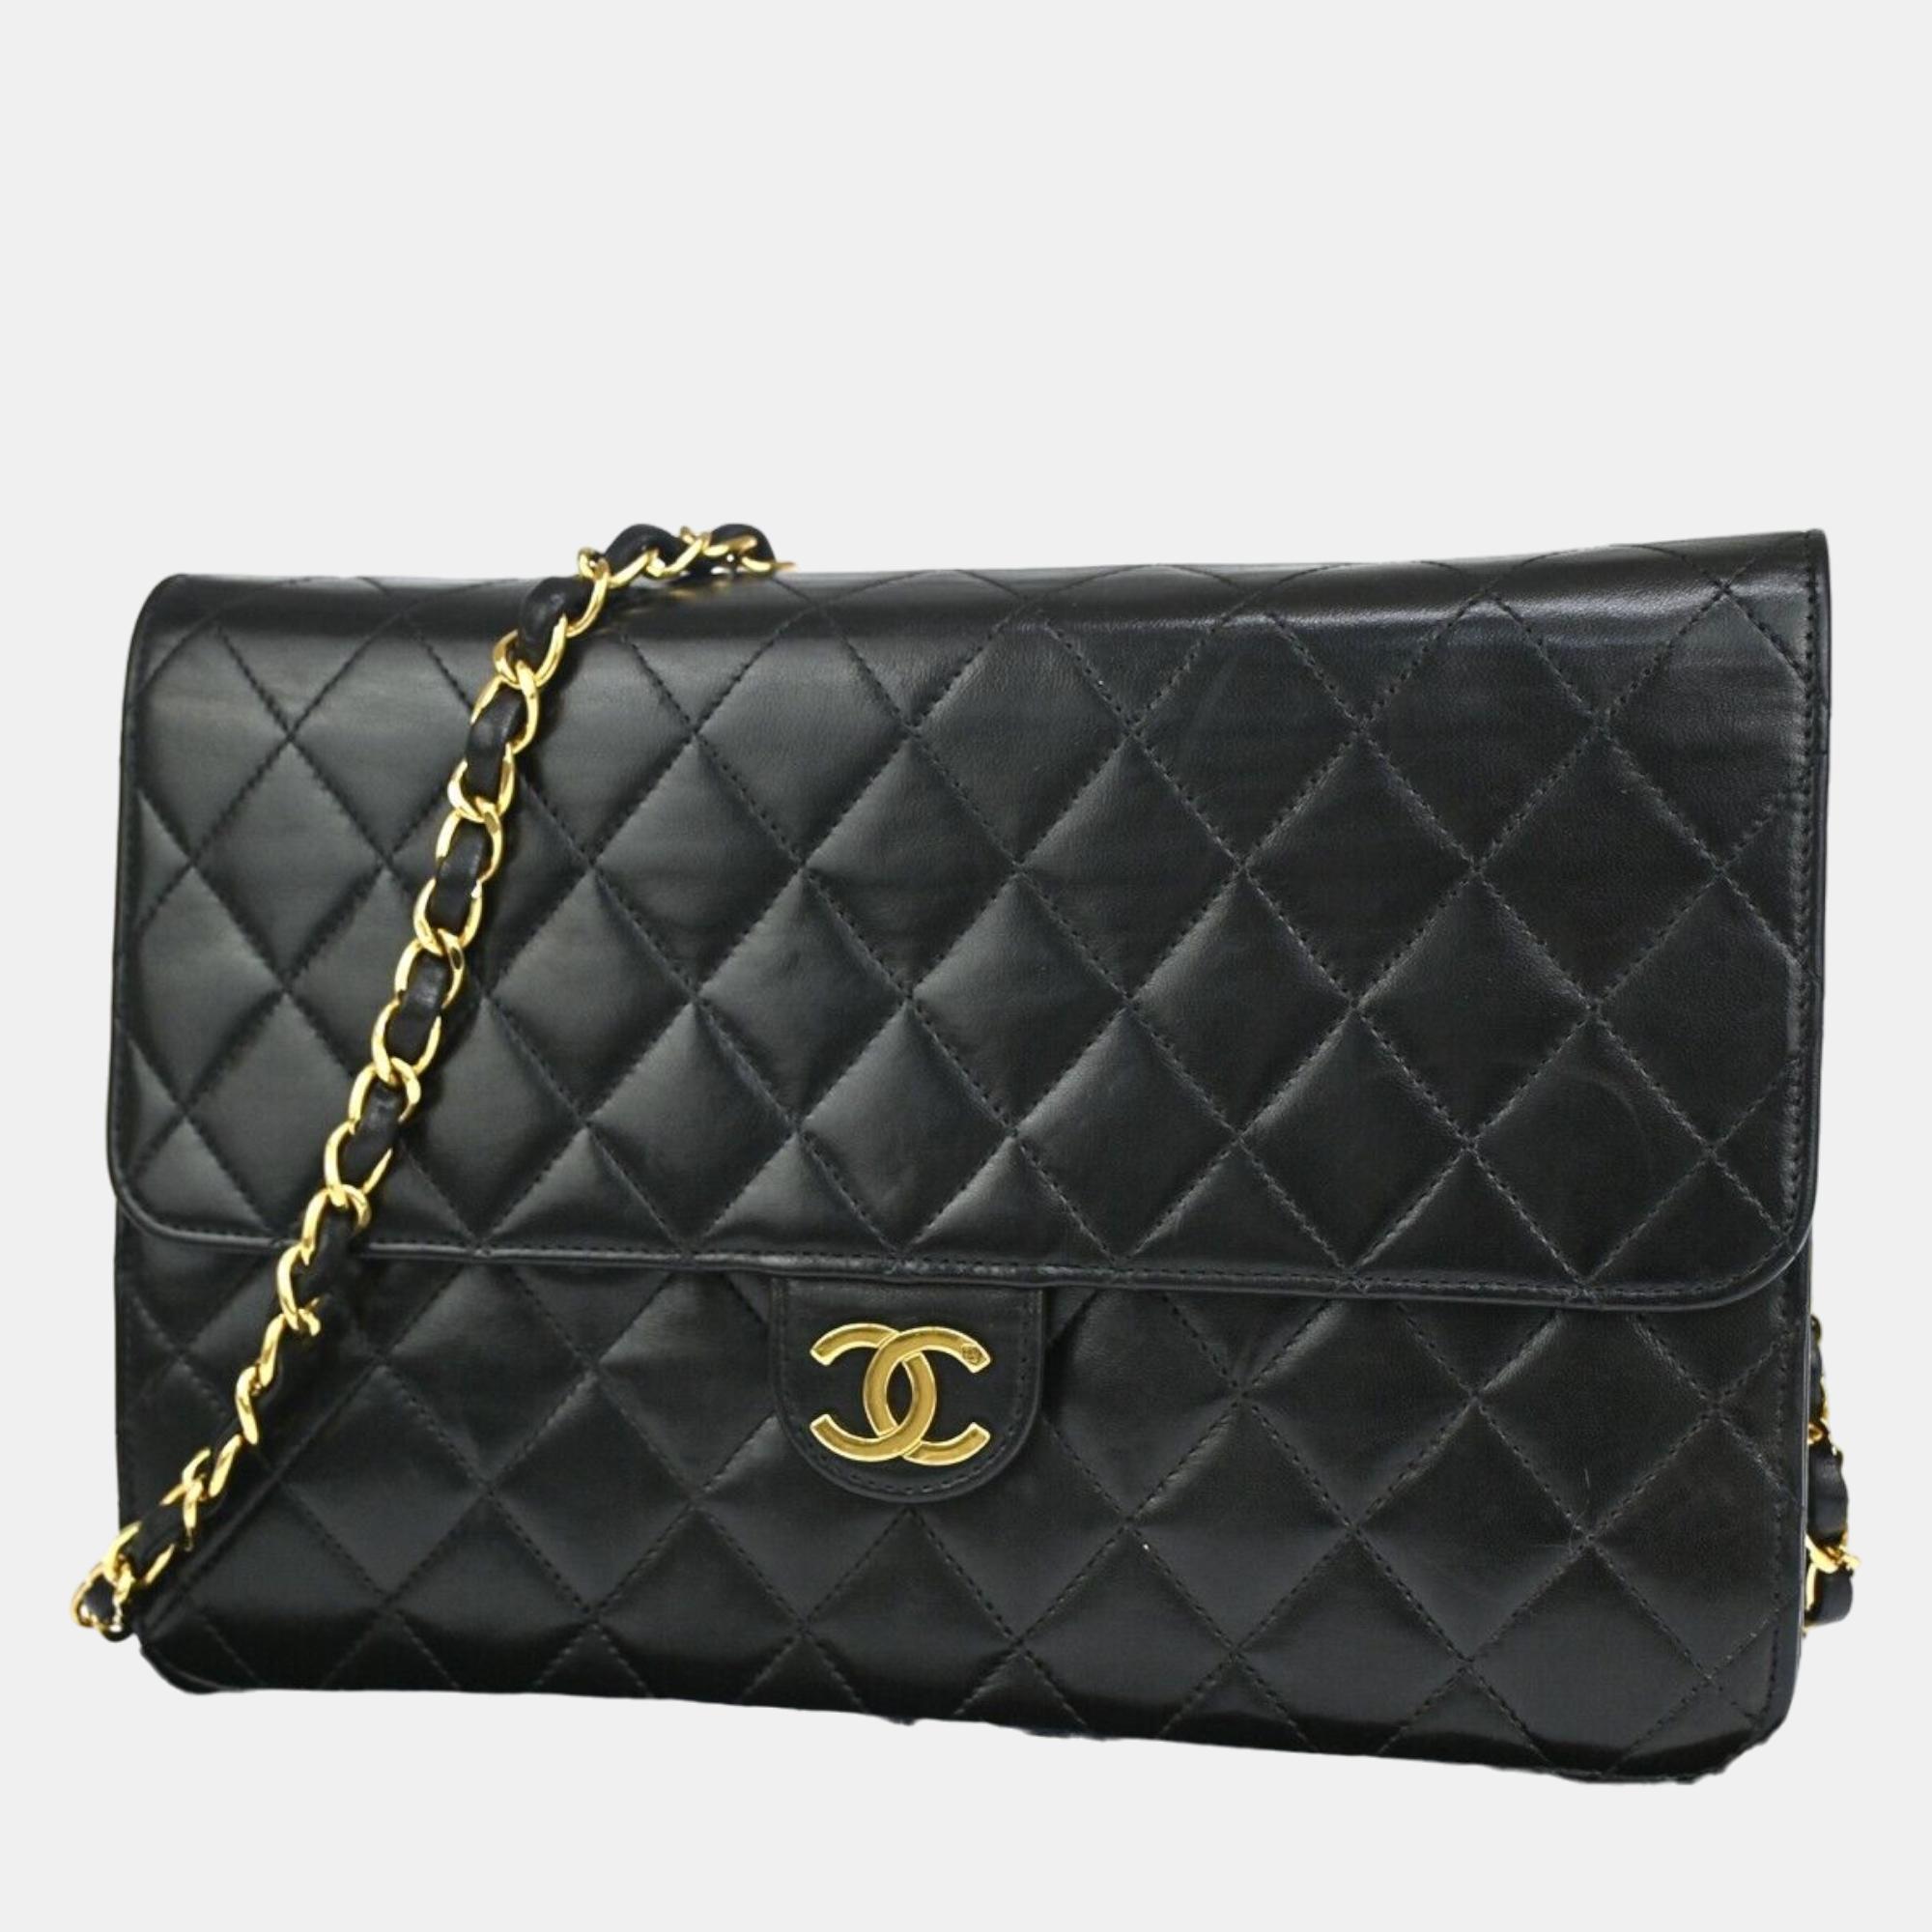 Chanel  lambskin leather large classic single flap shoulder bags